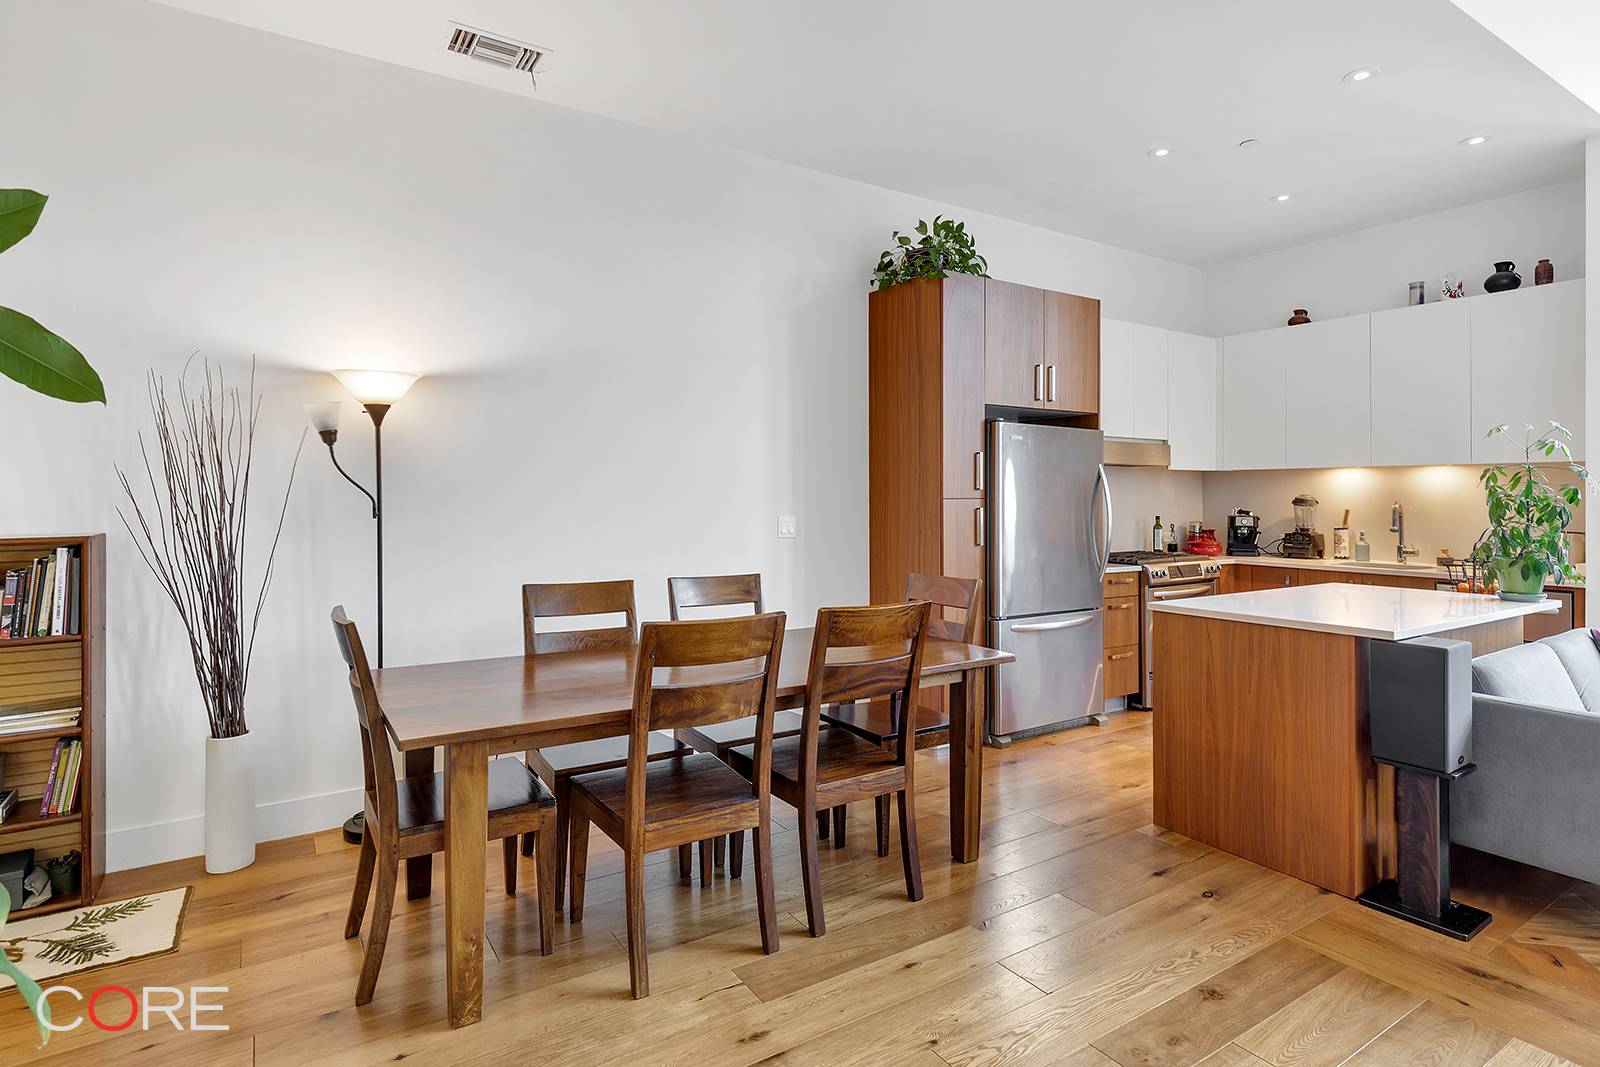 Apartment 3C at PS 90 Condominium is a spacious three bed, two bath home with 10 12 foot ceilings, resulting in gorgeous light and air as well as tremendous wall ...